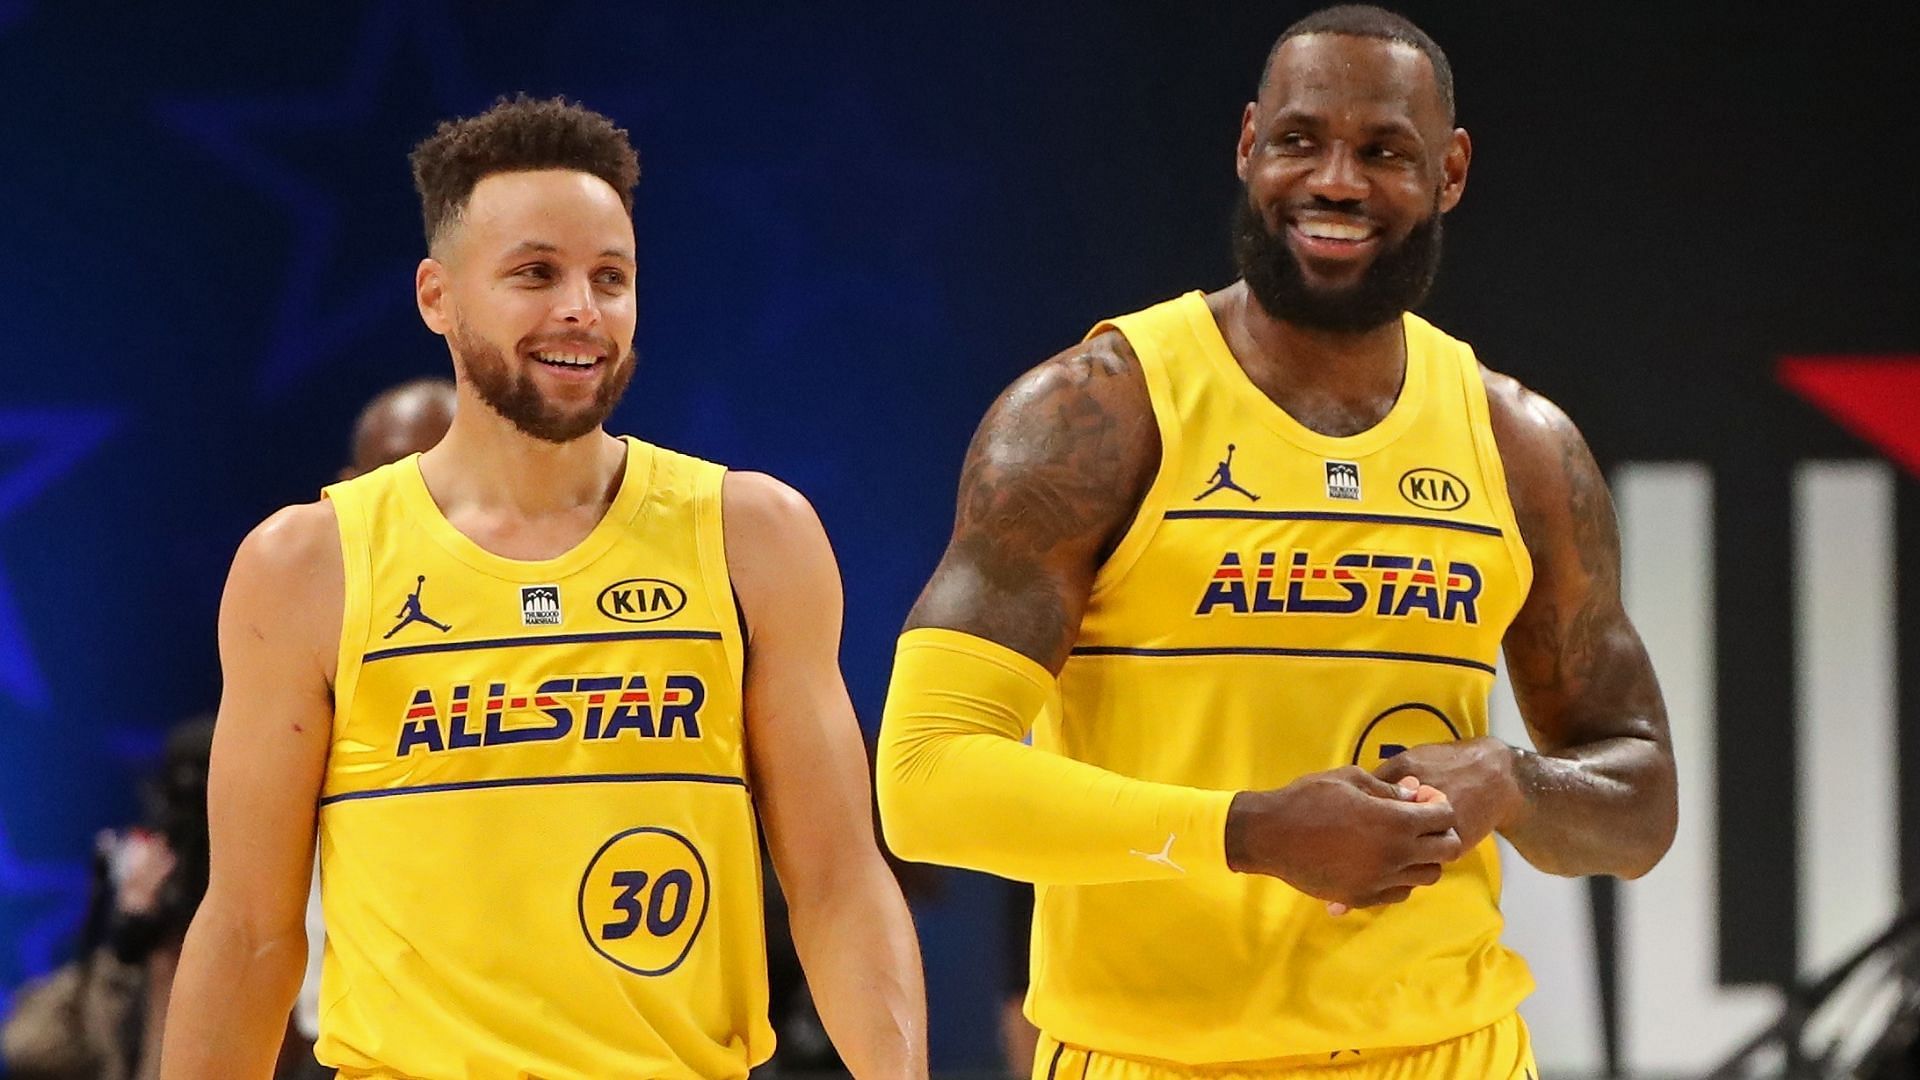 Steph Curry gets loudly booed by salty Cleveland Cavaaliers fans as he was introduced during the 2022 All-Star Game. [Photo: Sporting News]